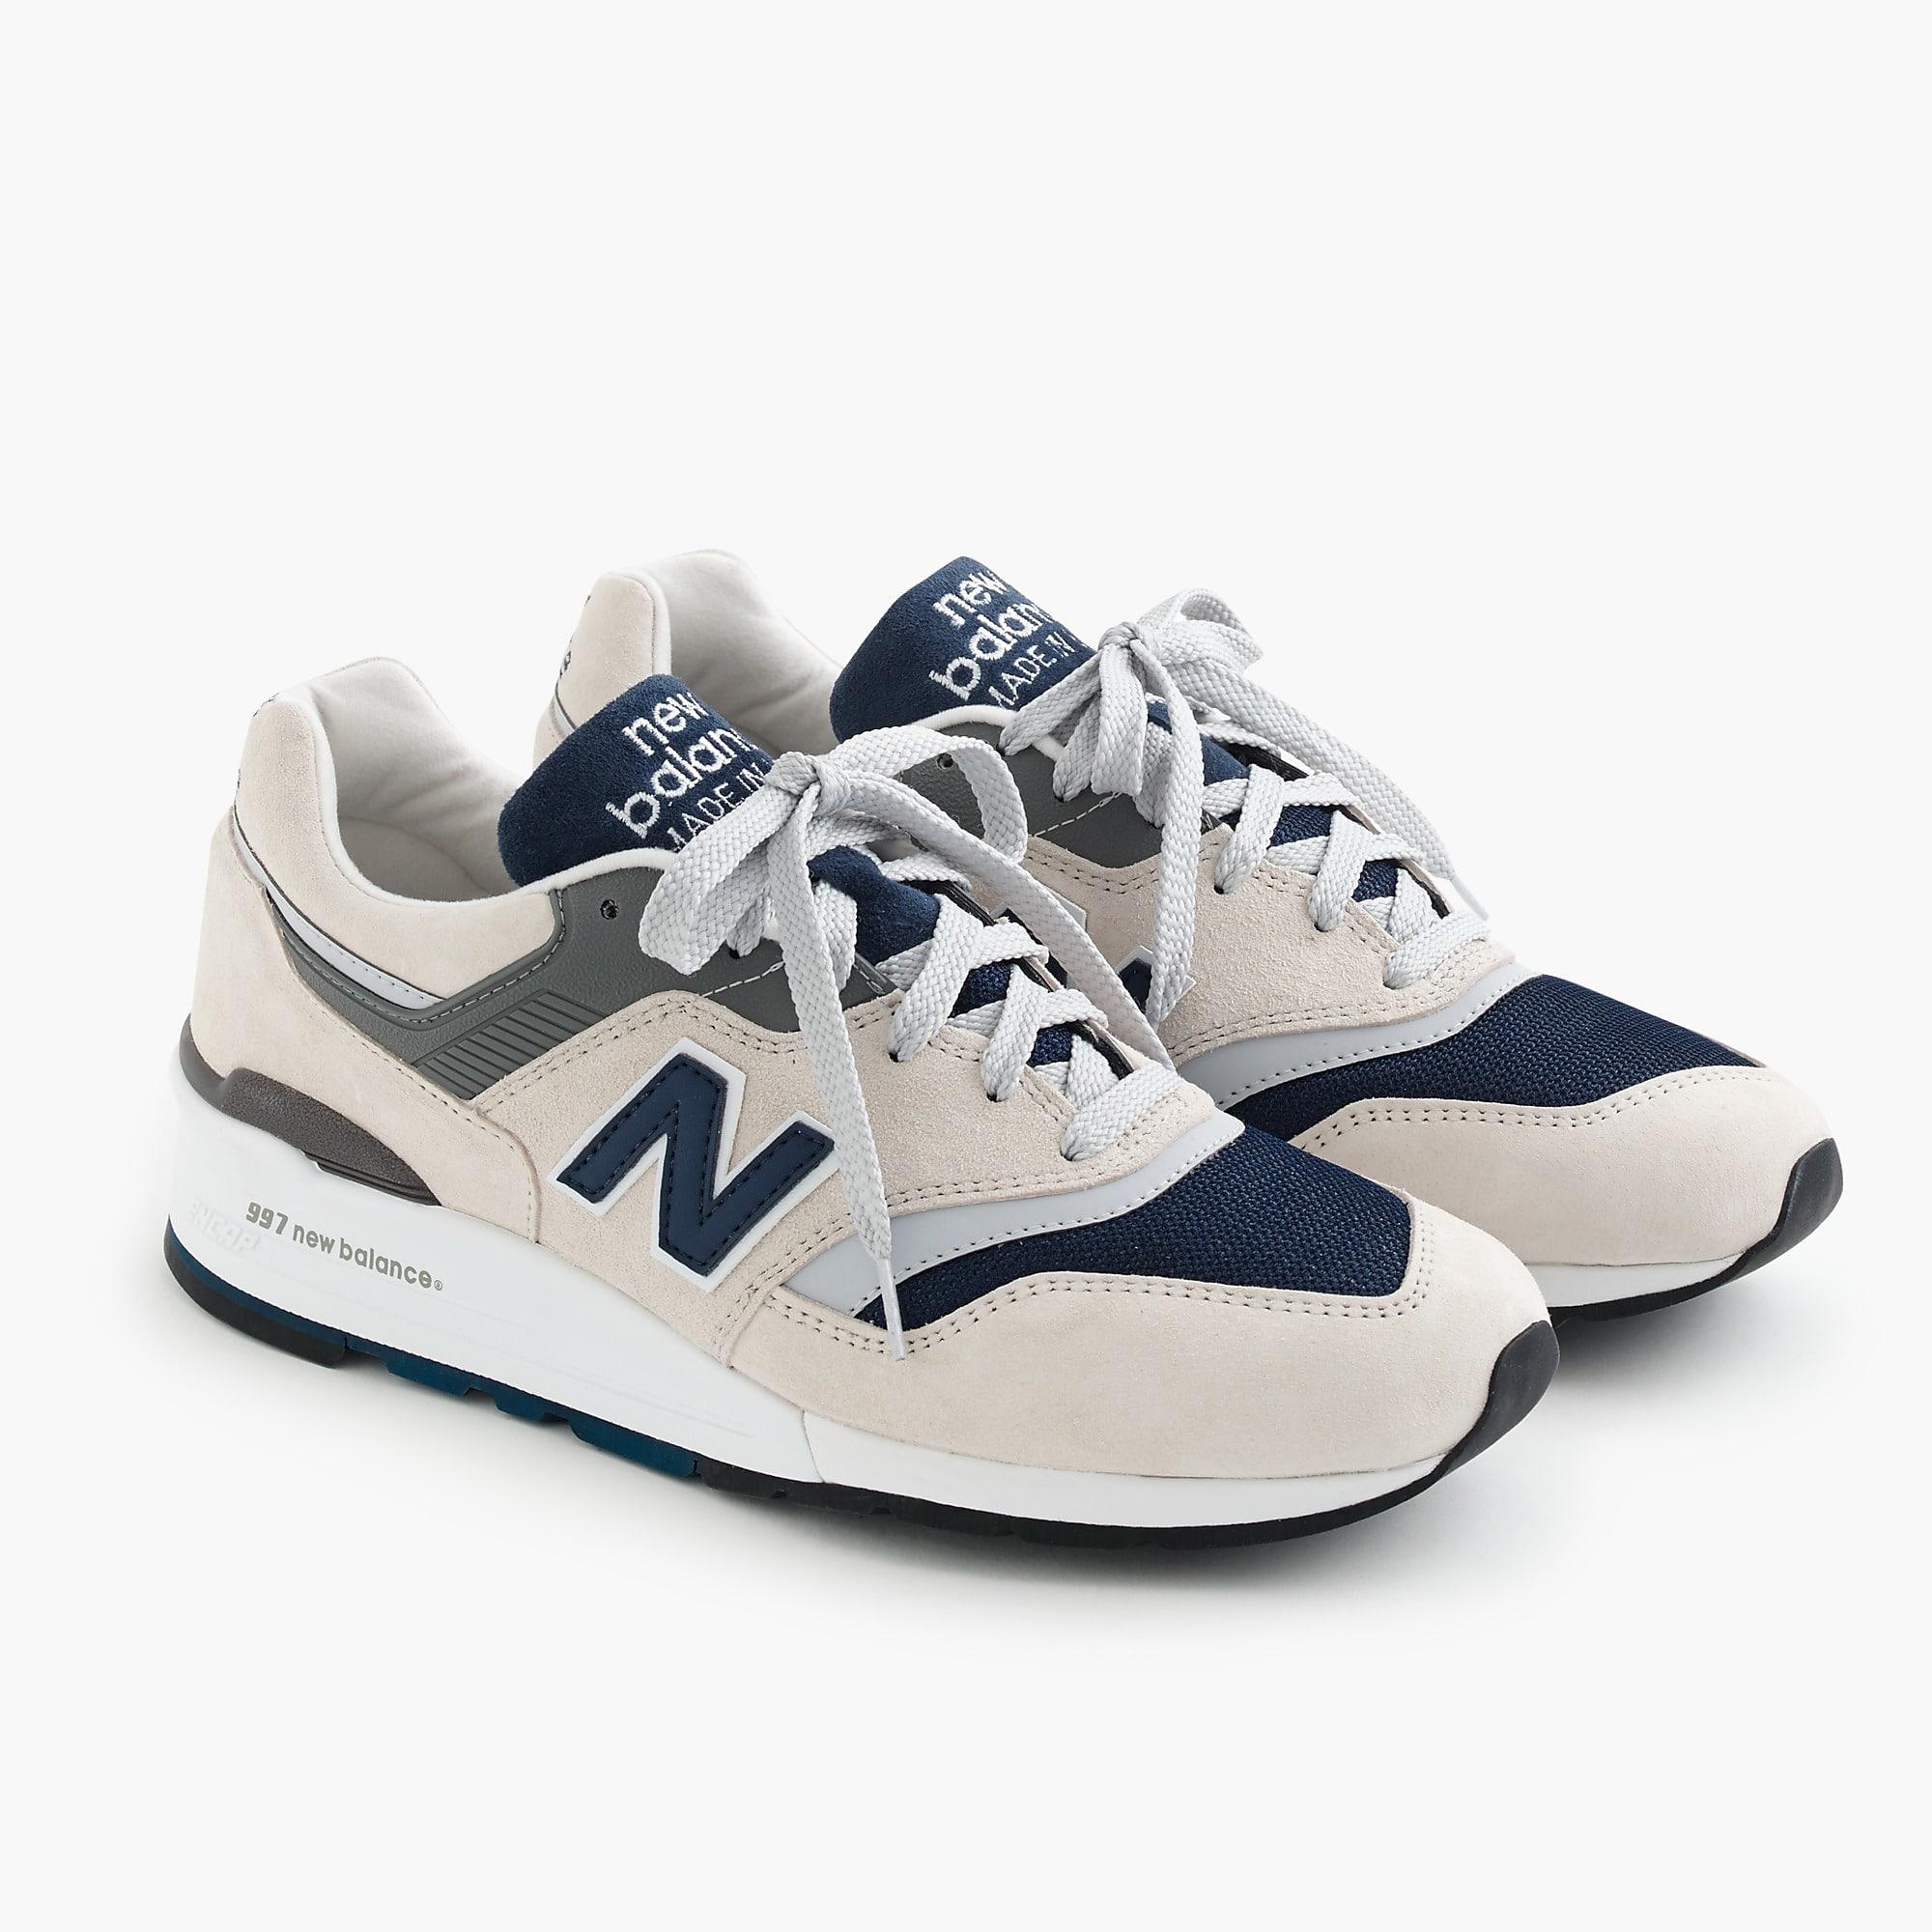 New Balance Suede 997 Moonshot Sneakers in Blue for Men - Lyst